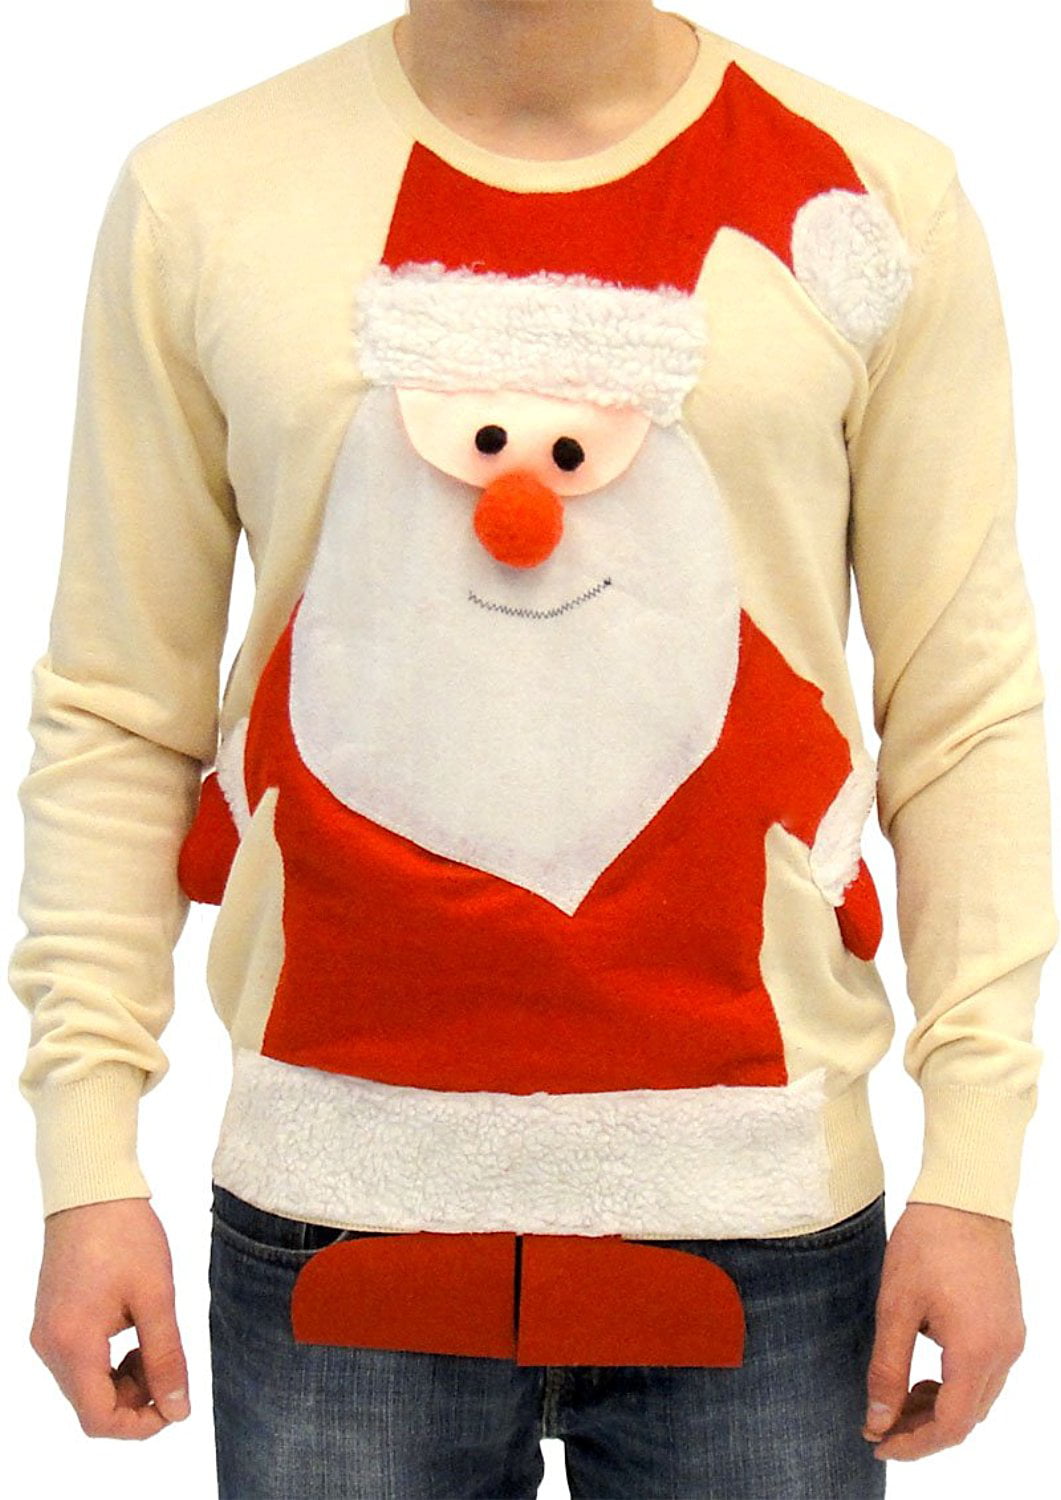 Ugly Christmas Sweater Santa Claus Full Body Adult Beige Sweater image picture